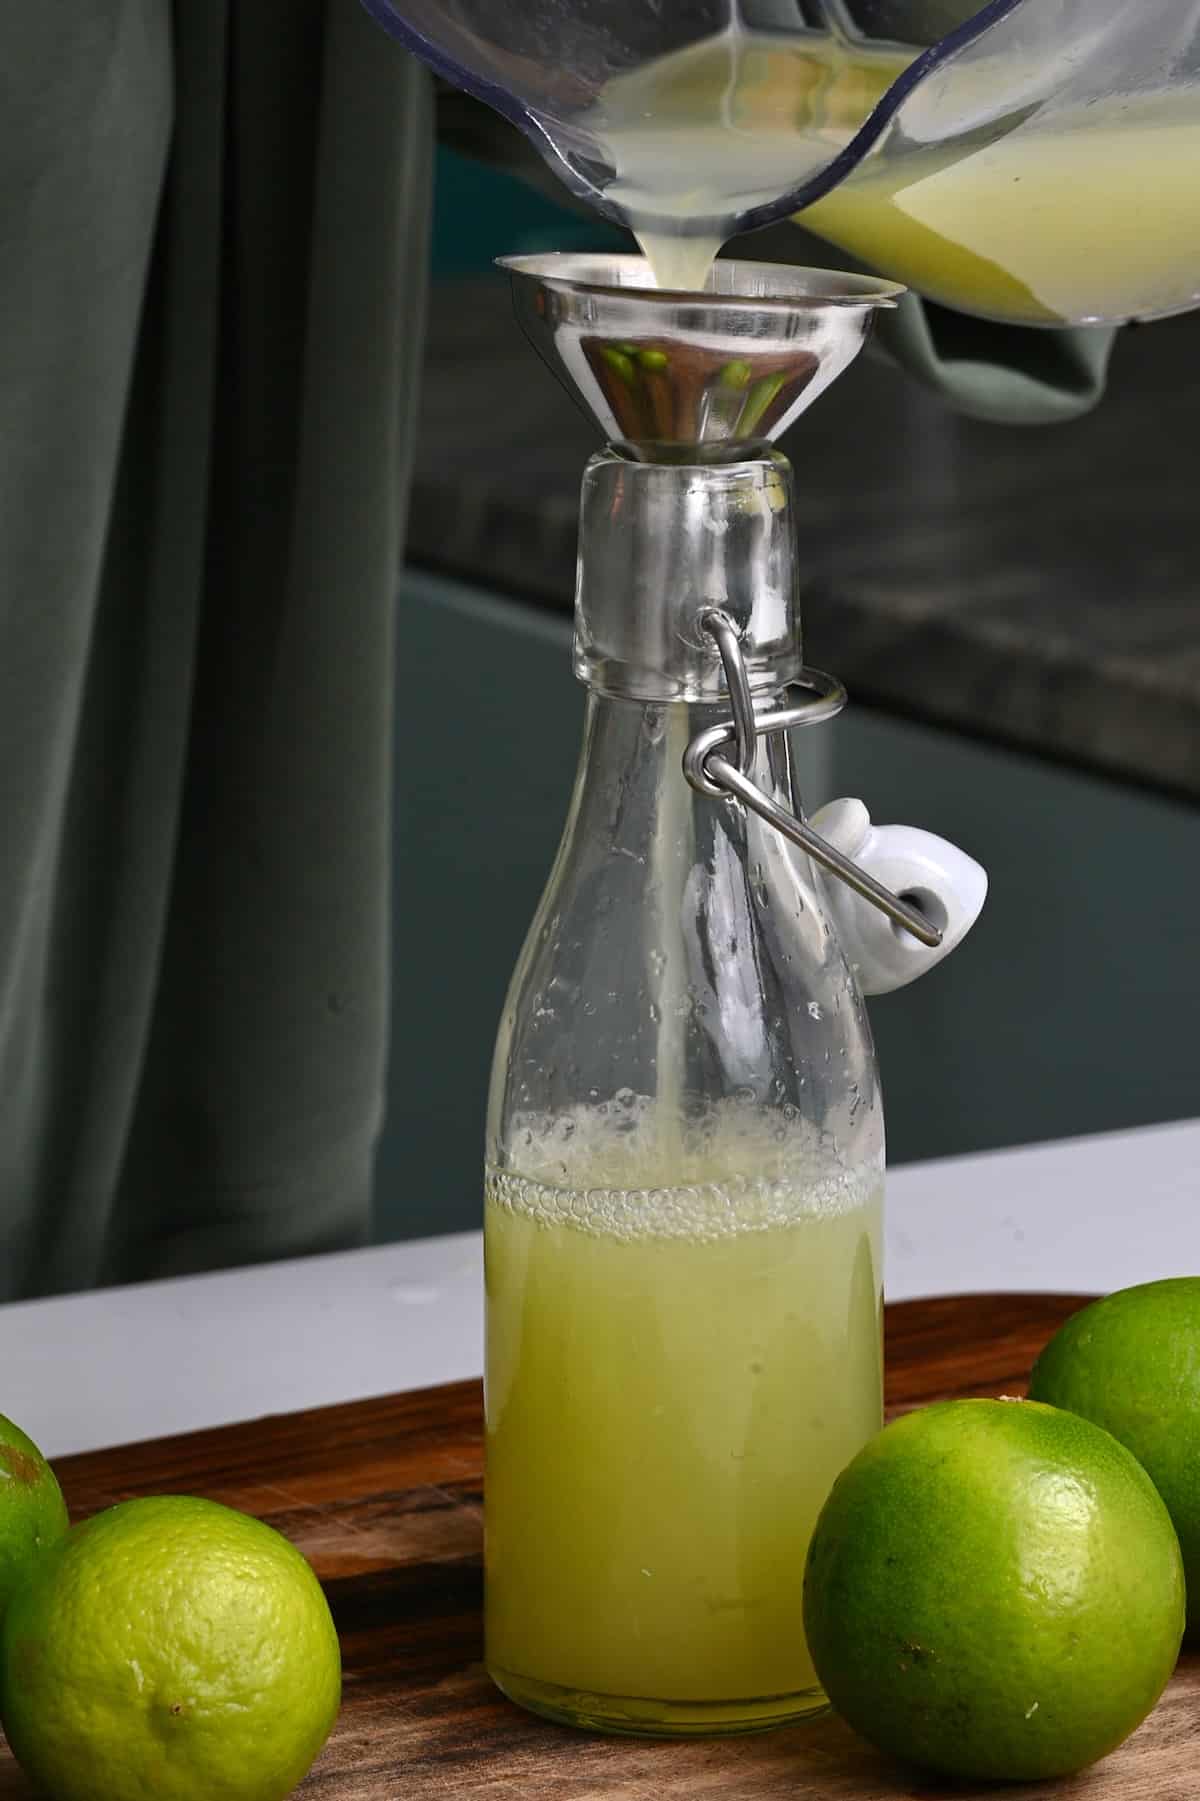 Pouring freshly squeezed lime juice in a bottle